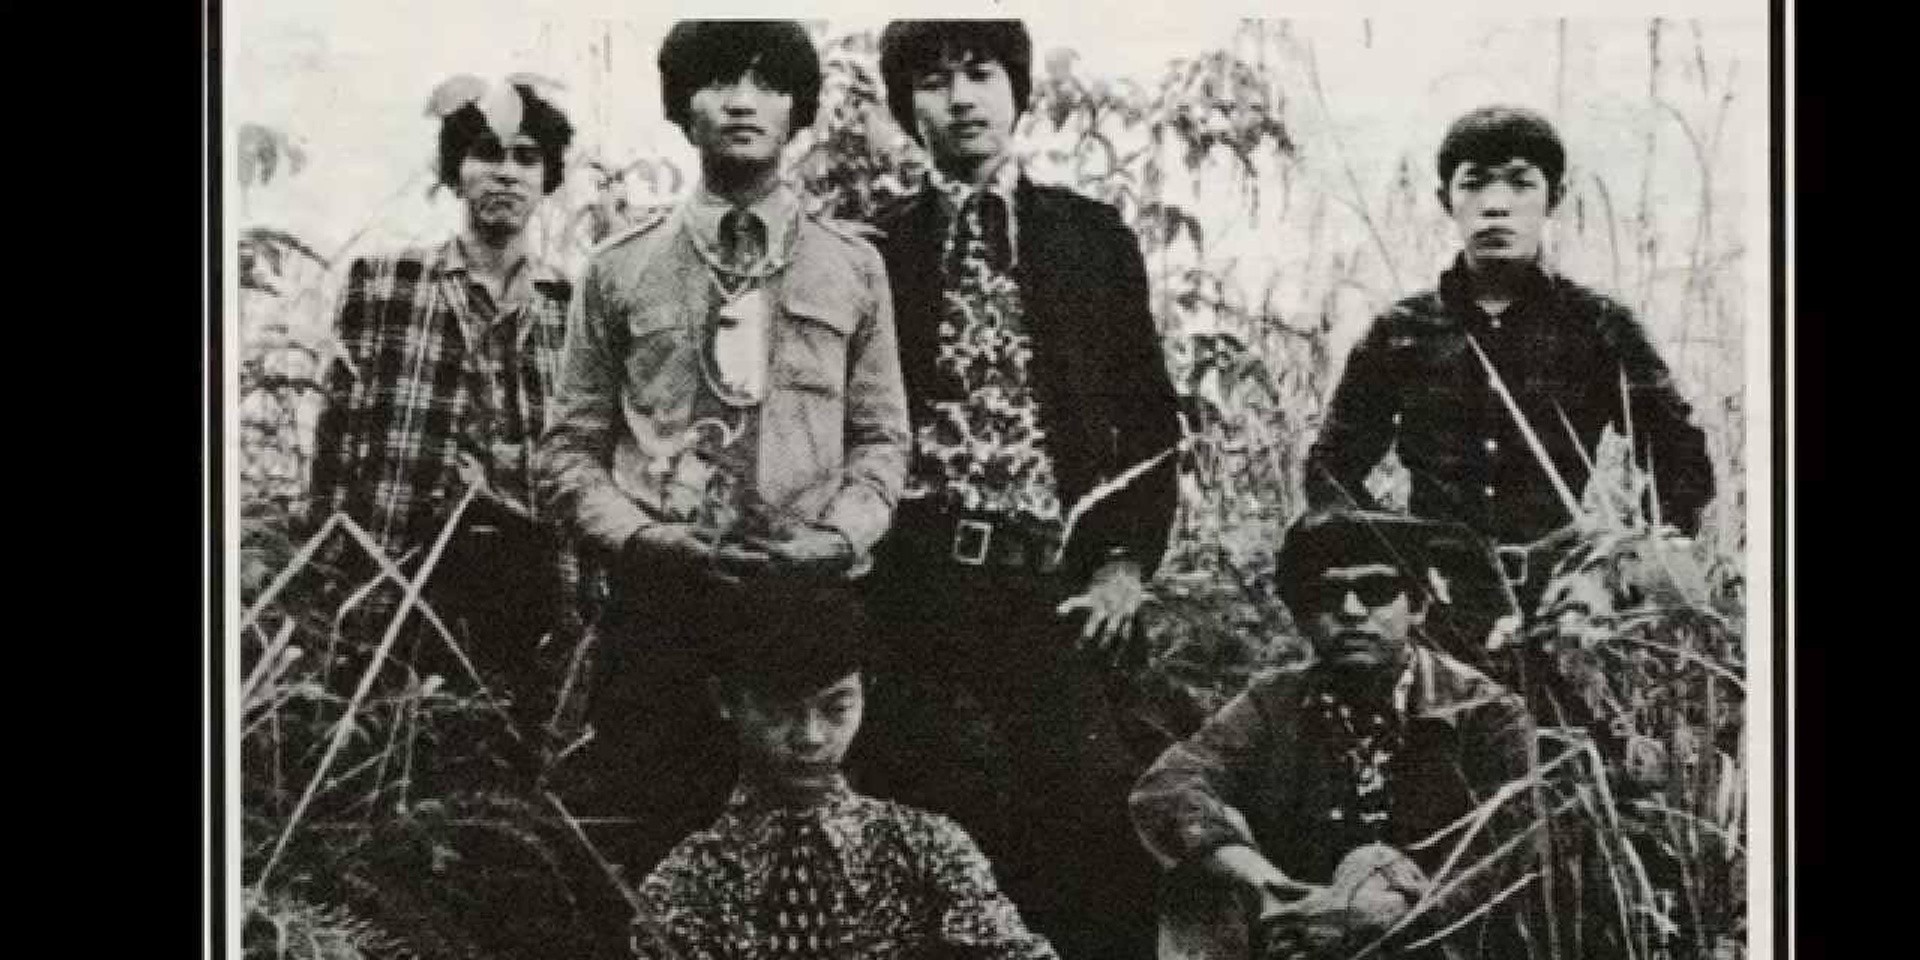 Singaporean psychedelic blues pioneers The Straydogs reunite for a 50th Anniversary teadance